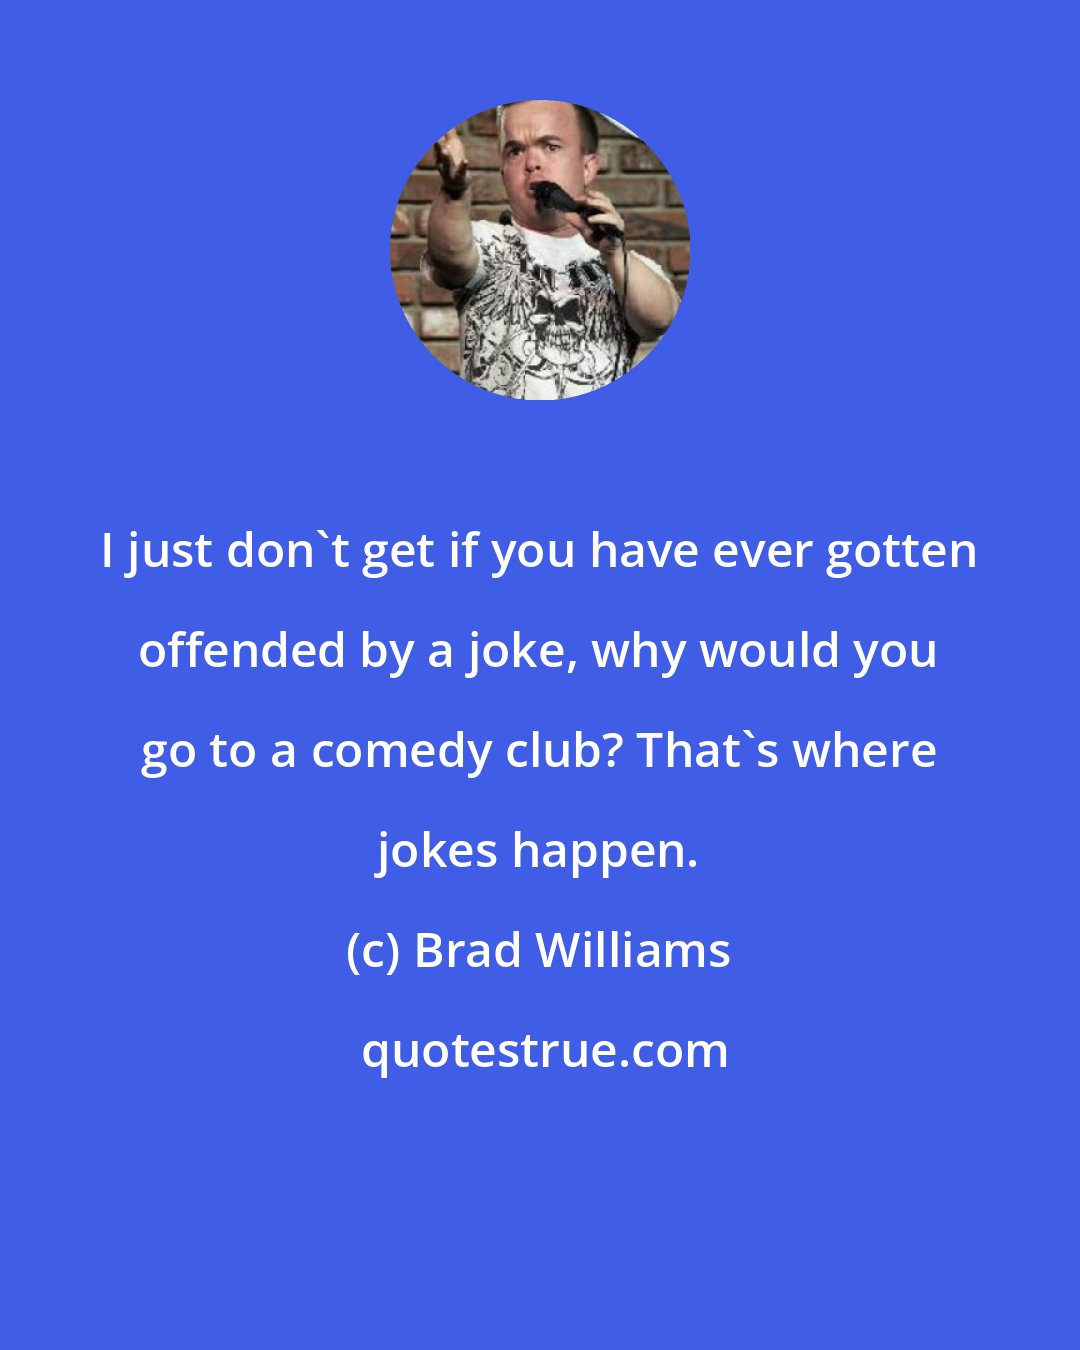 Brad Williams: I just don't get if you have ever gotten offended by a joke, why would you go to a comedy club? That's where jokes happen.